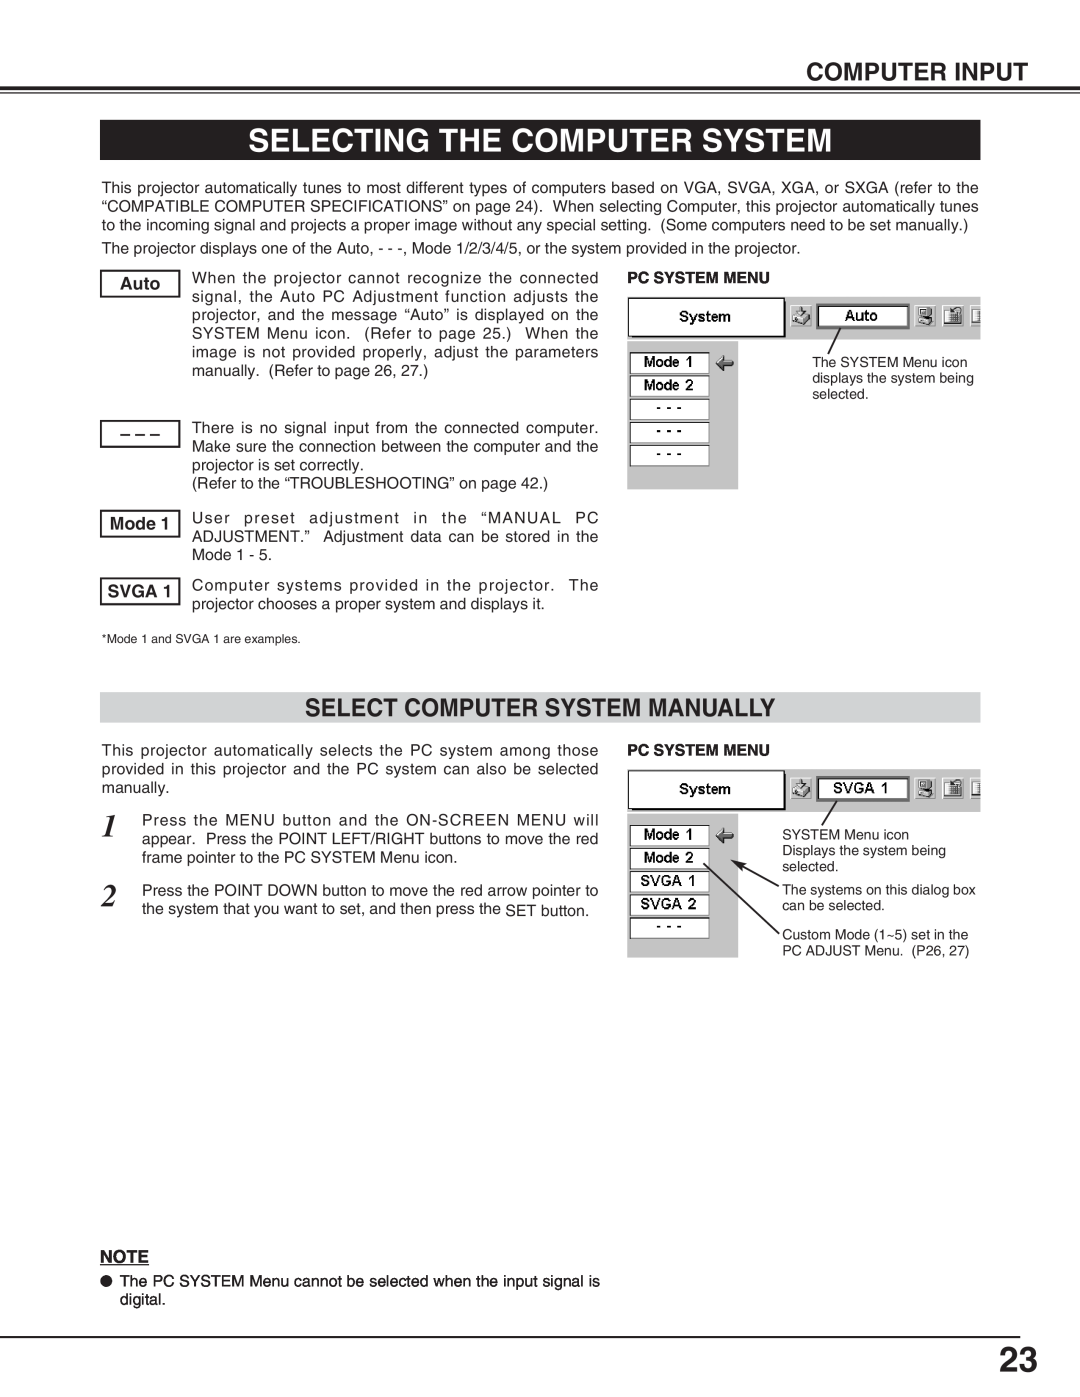 Canon LV-5200 owner manual Selecting The Computer System, Computer Input, Select Computer System Manually 